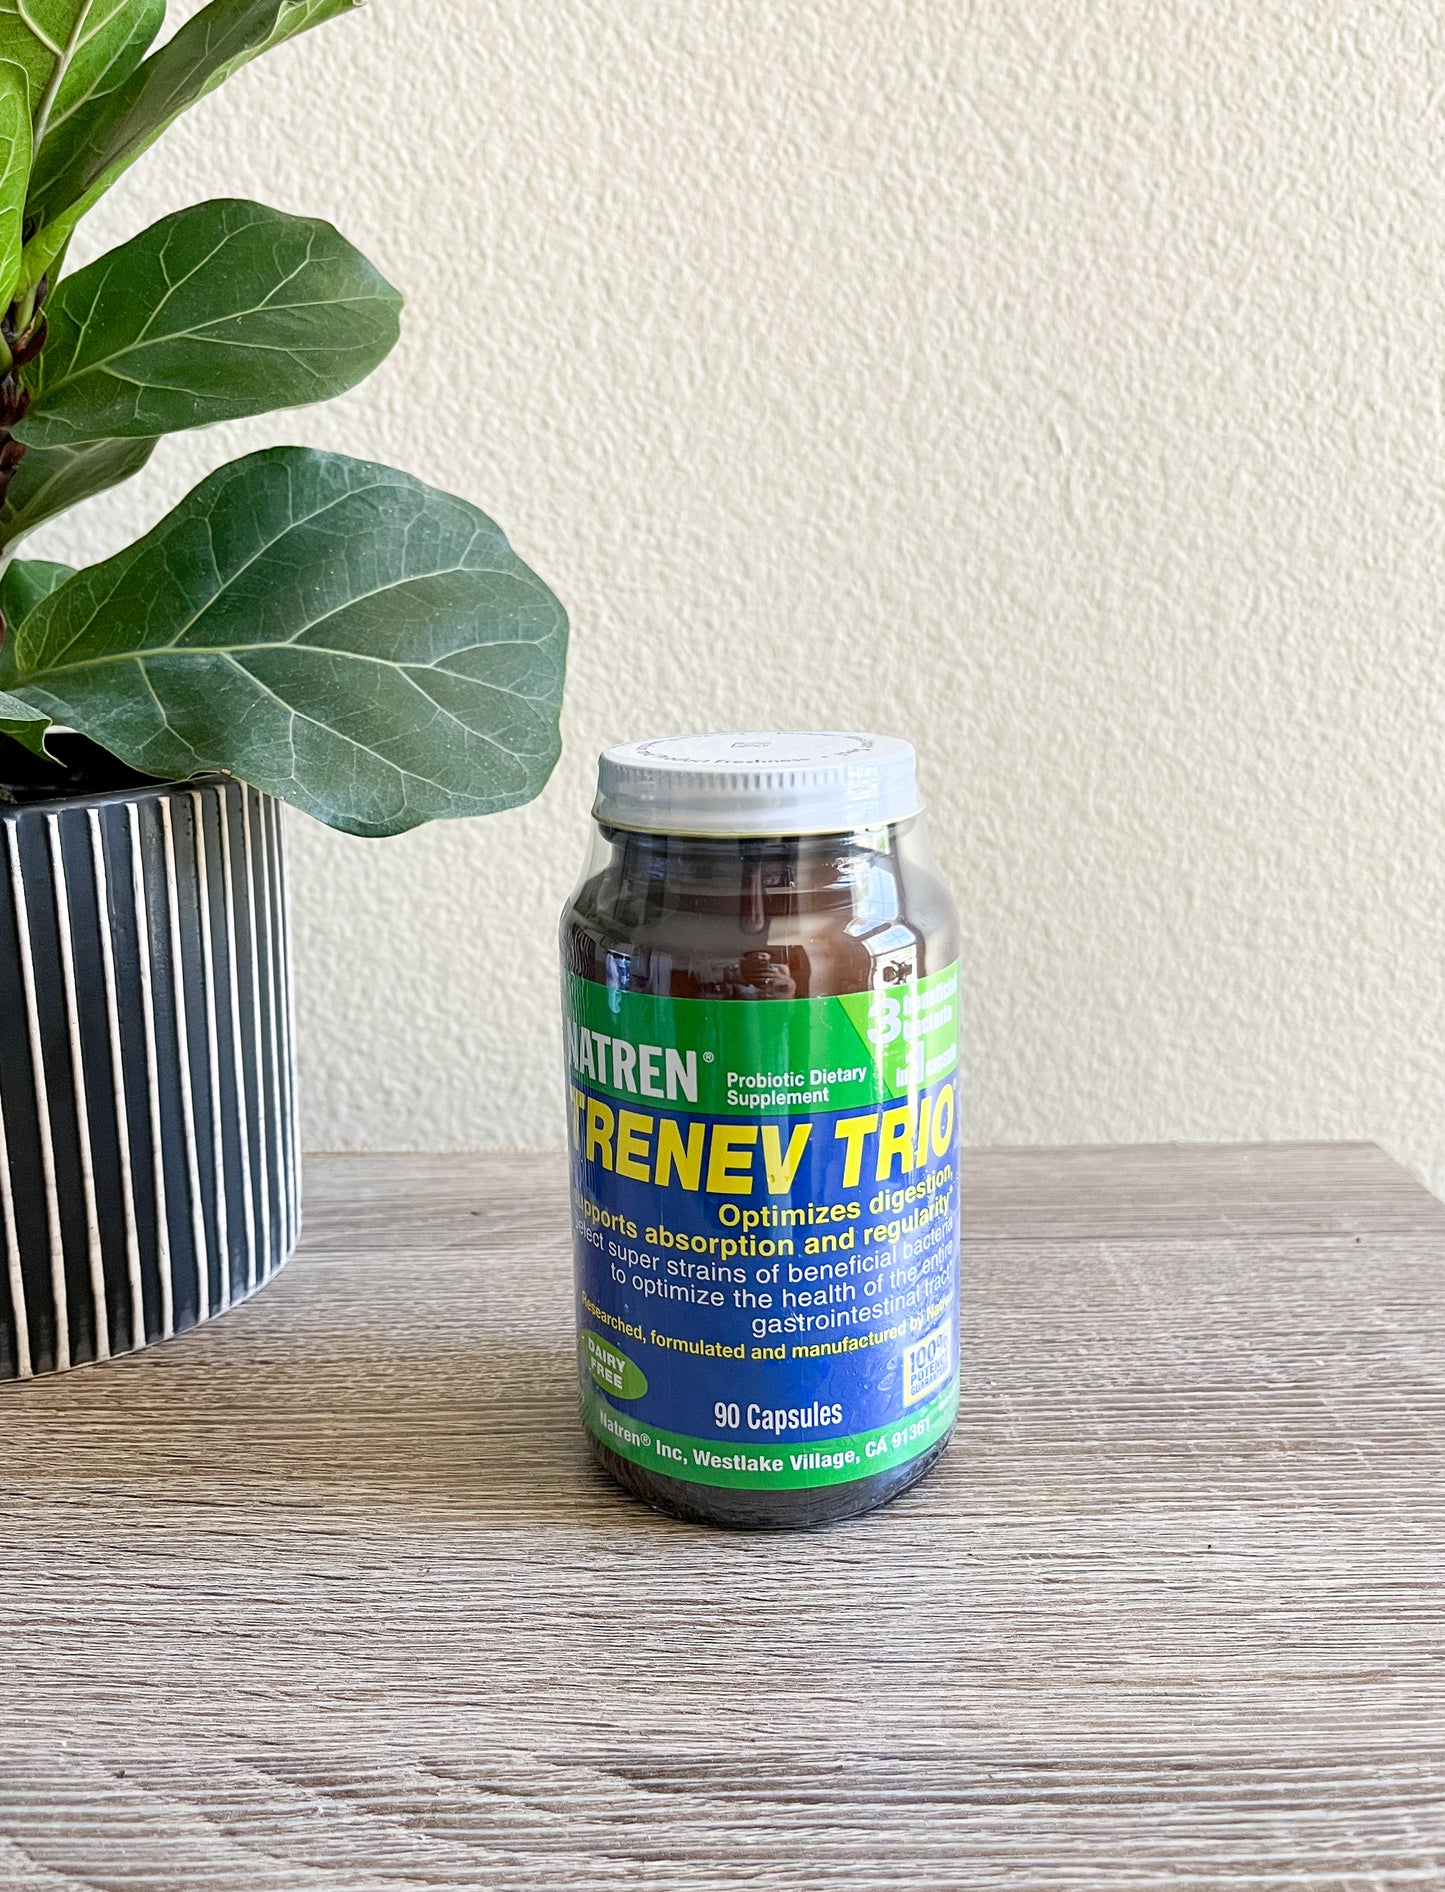 Natren Probiotics trenev trio - ultimate solution for digestion - PROBIOTICS FOR THE WHOLE FAMILY